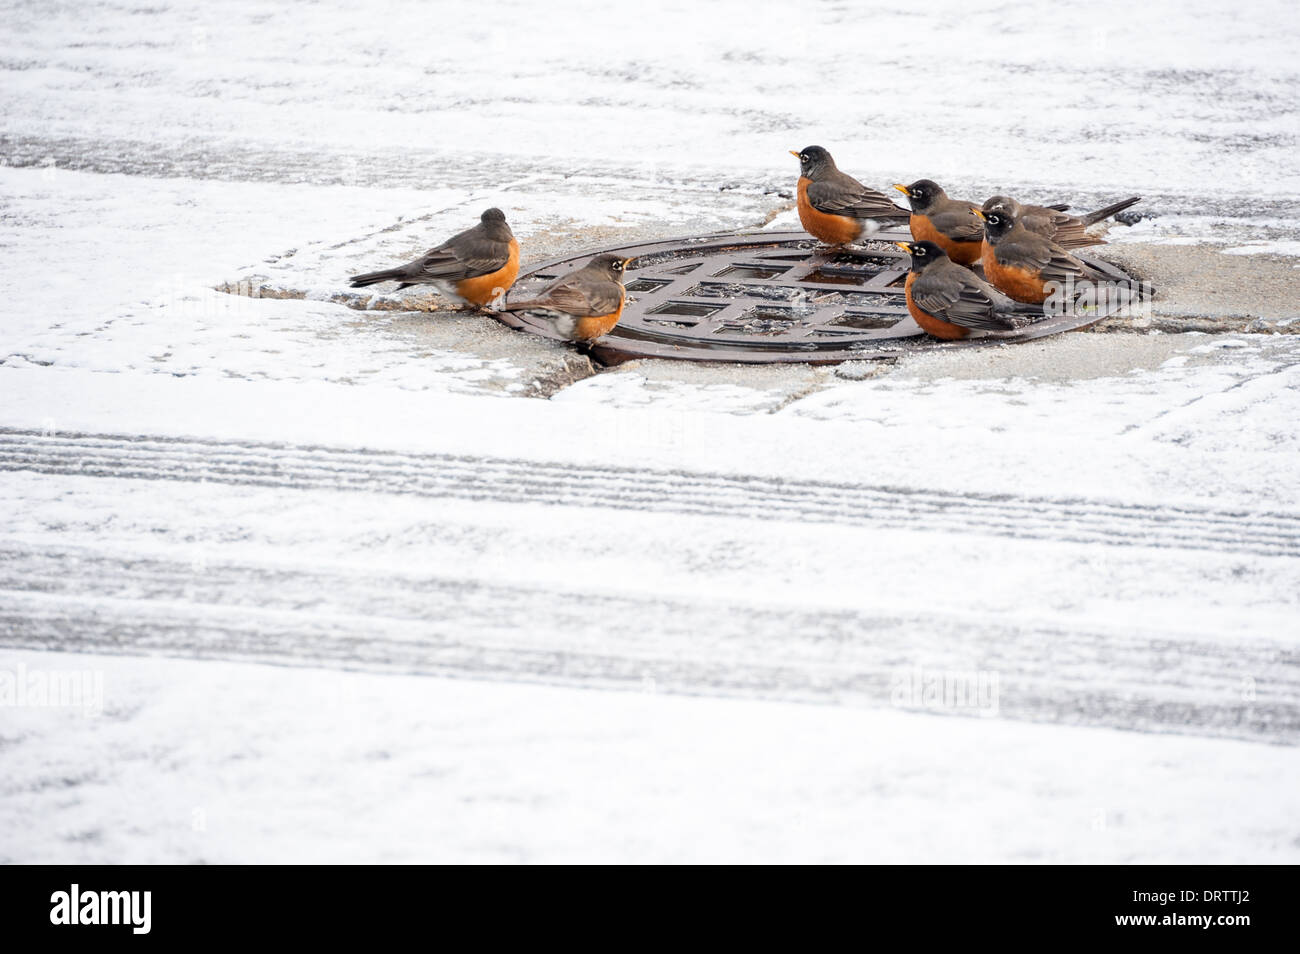 A community of robins gather around the 'watering hole' of a manhole cover on a snowy street in Metro Atlanta, Georgia. (USA) Stock Photo